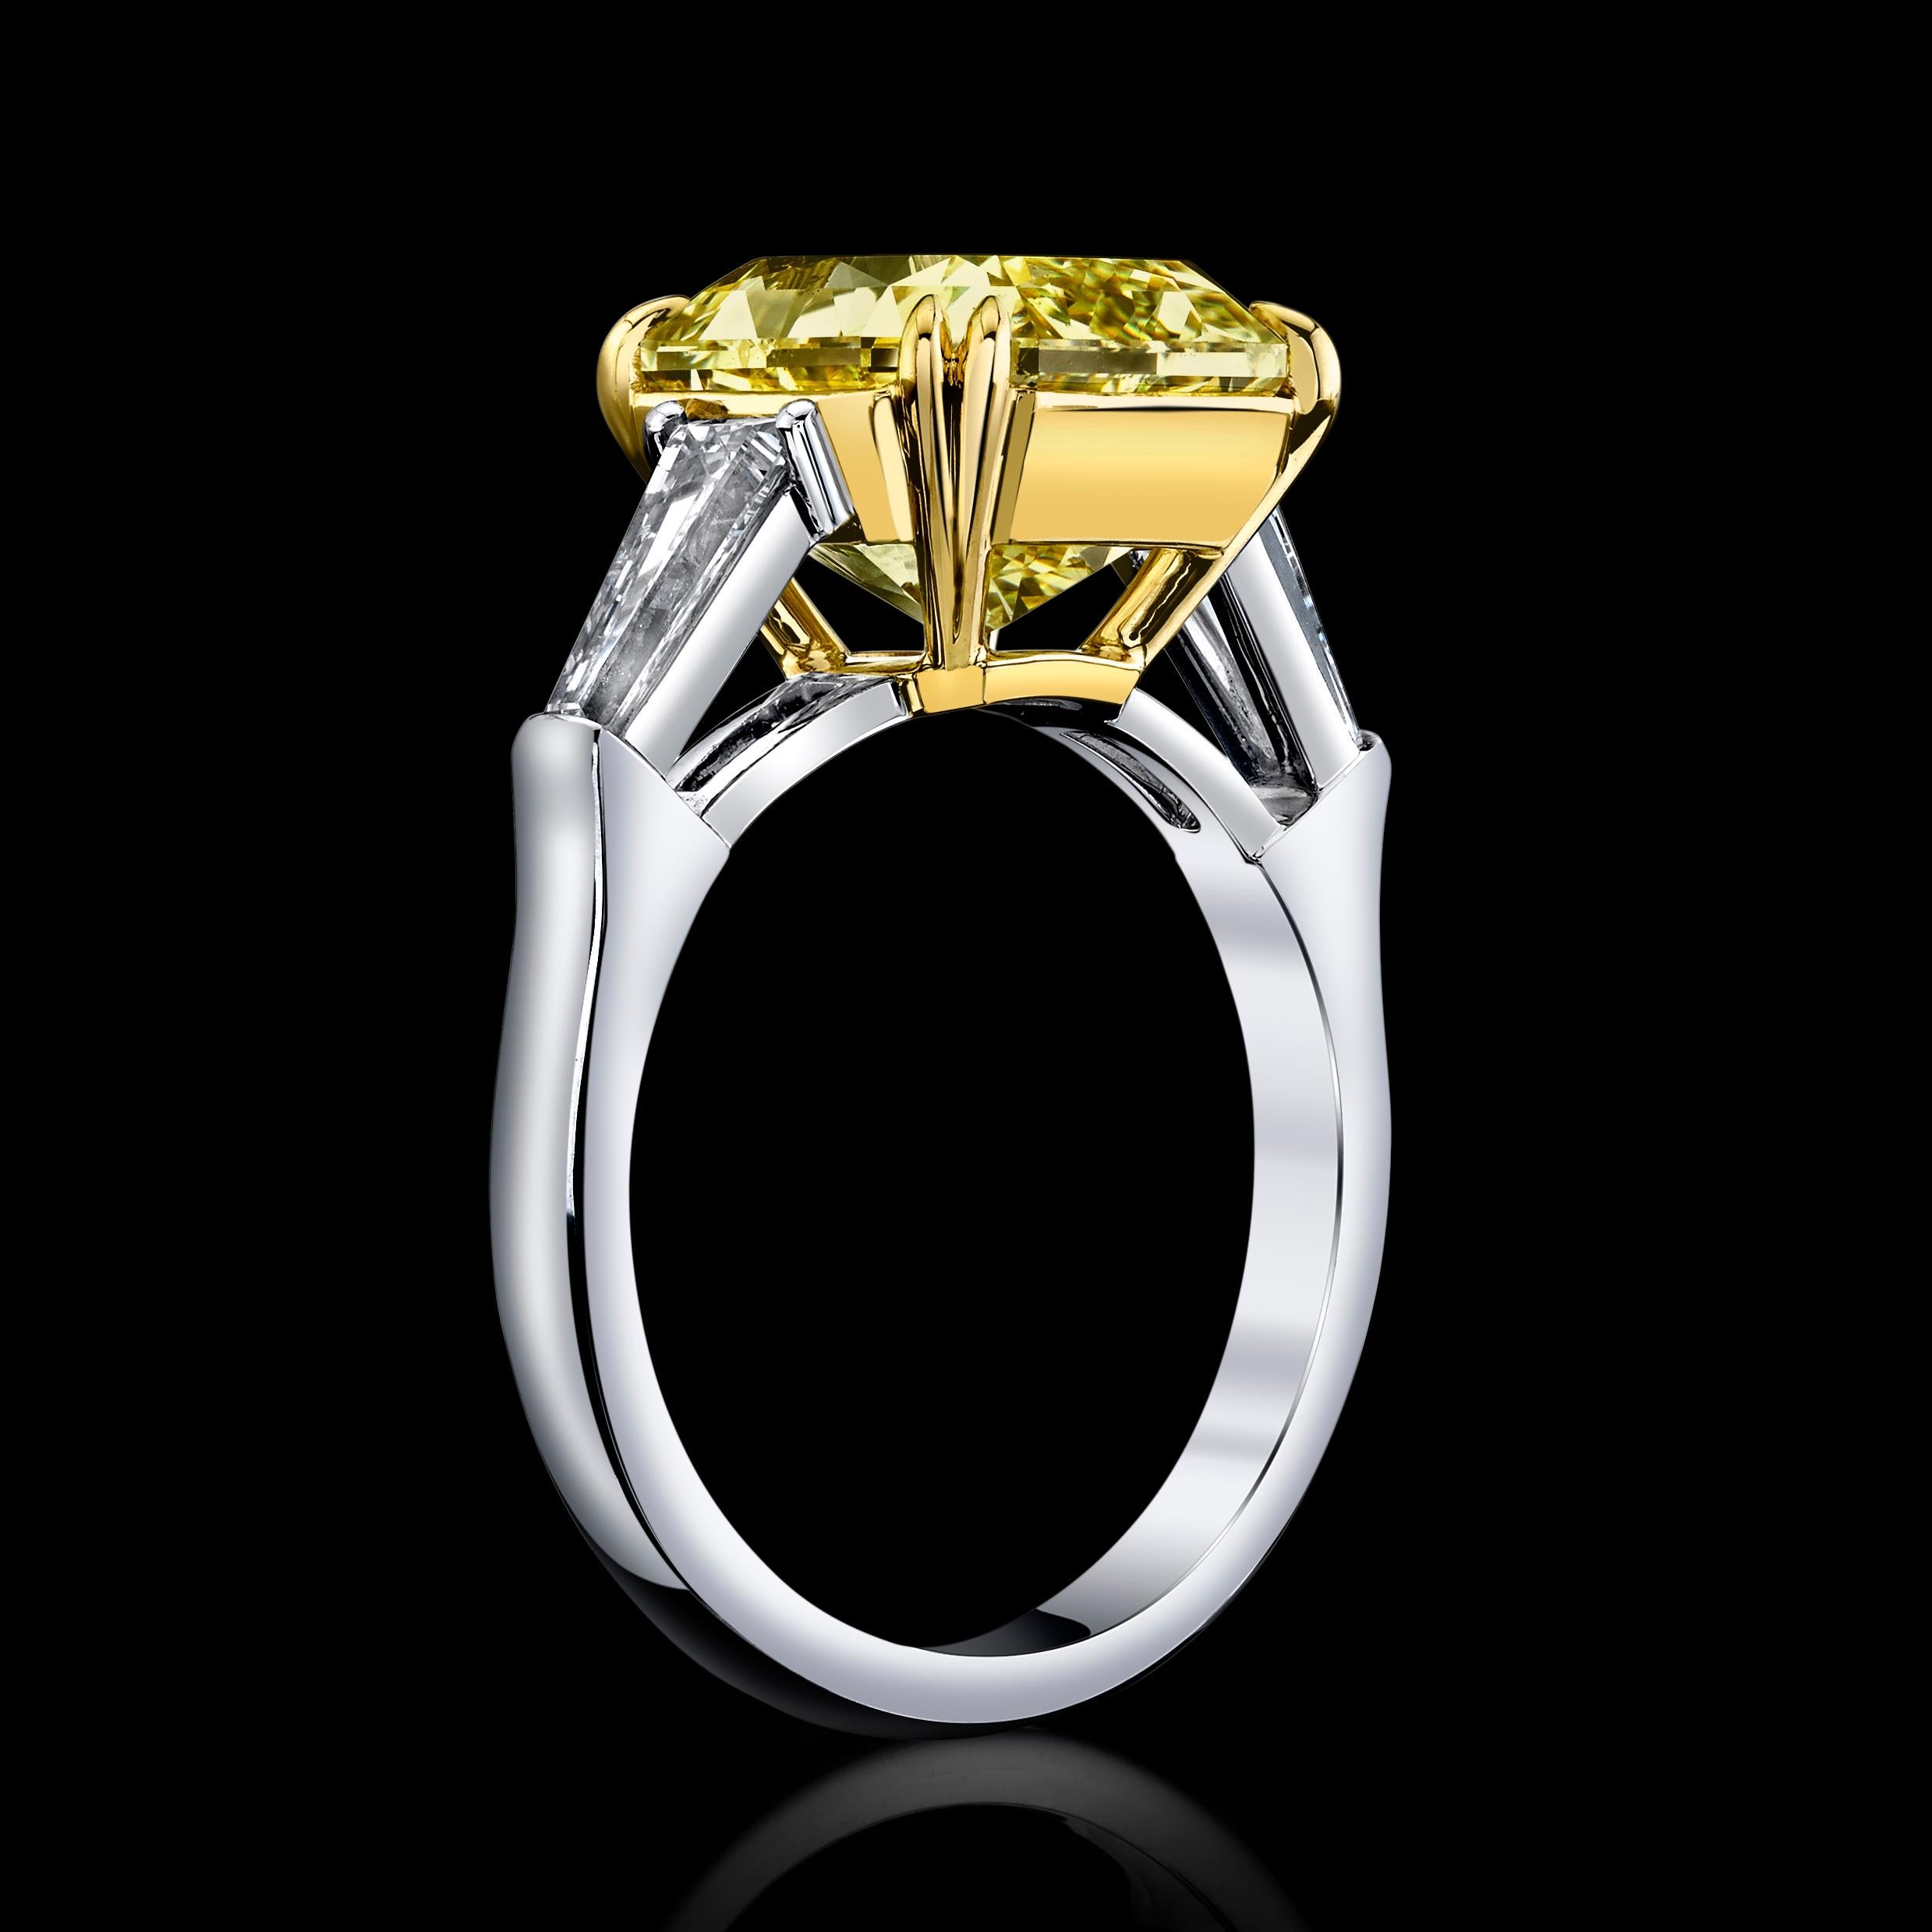 Brighten your day with this exquisite 5.07ct Radiant Fancy Yellow, SI2 Natural Diamond set in a Platinum & 18K Yellow Gold Ring flanked by 2 shimmering Baguette Diamonds=0.65cttw

This Diamond is GIA certified.